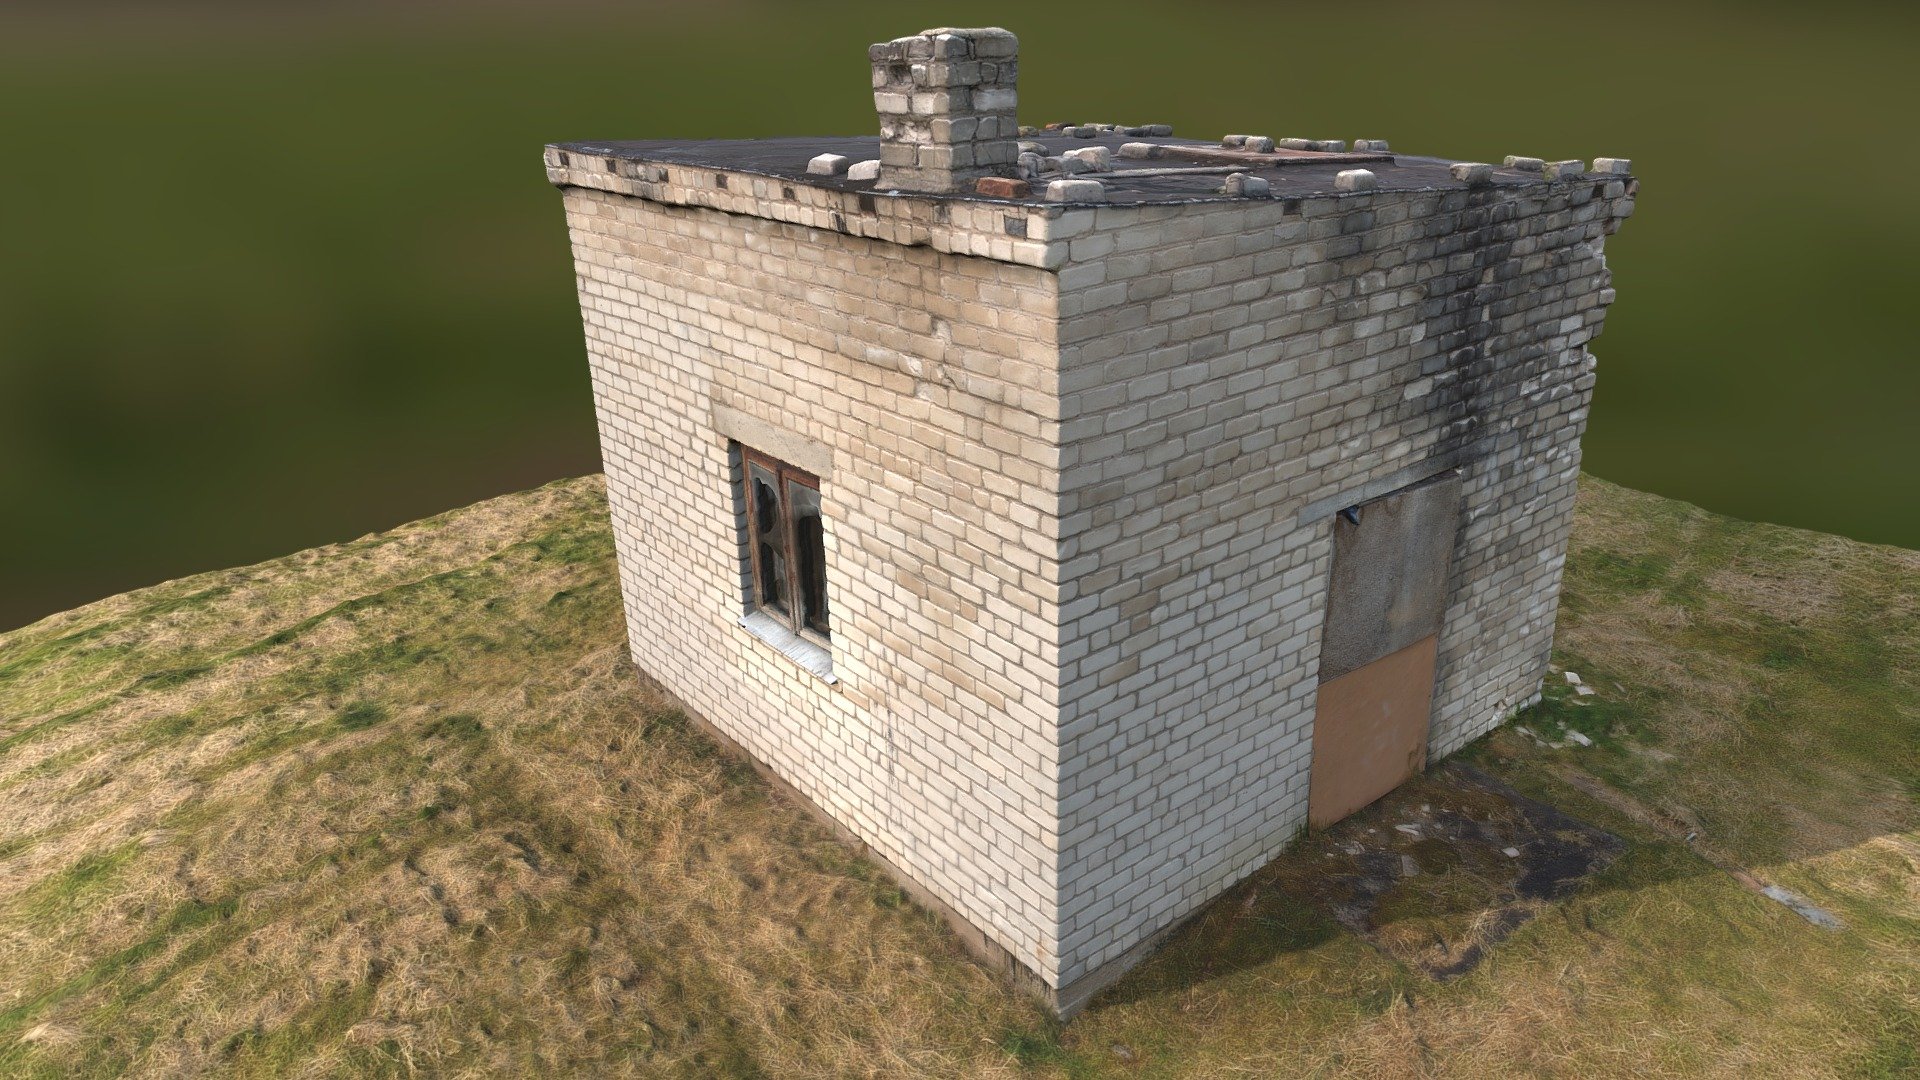 Small, abandoned, derelict brick house in the middle of a field.
Dirty brick walls, dirty roof, old, collapsed chimney 3d model